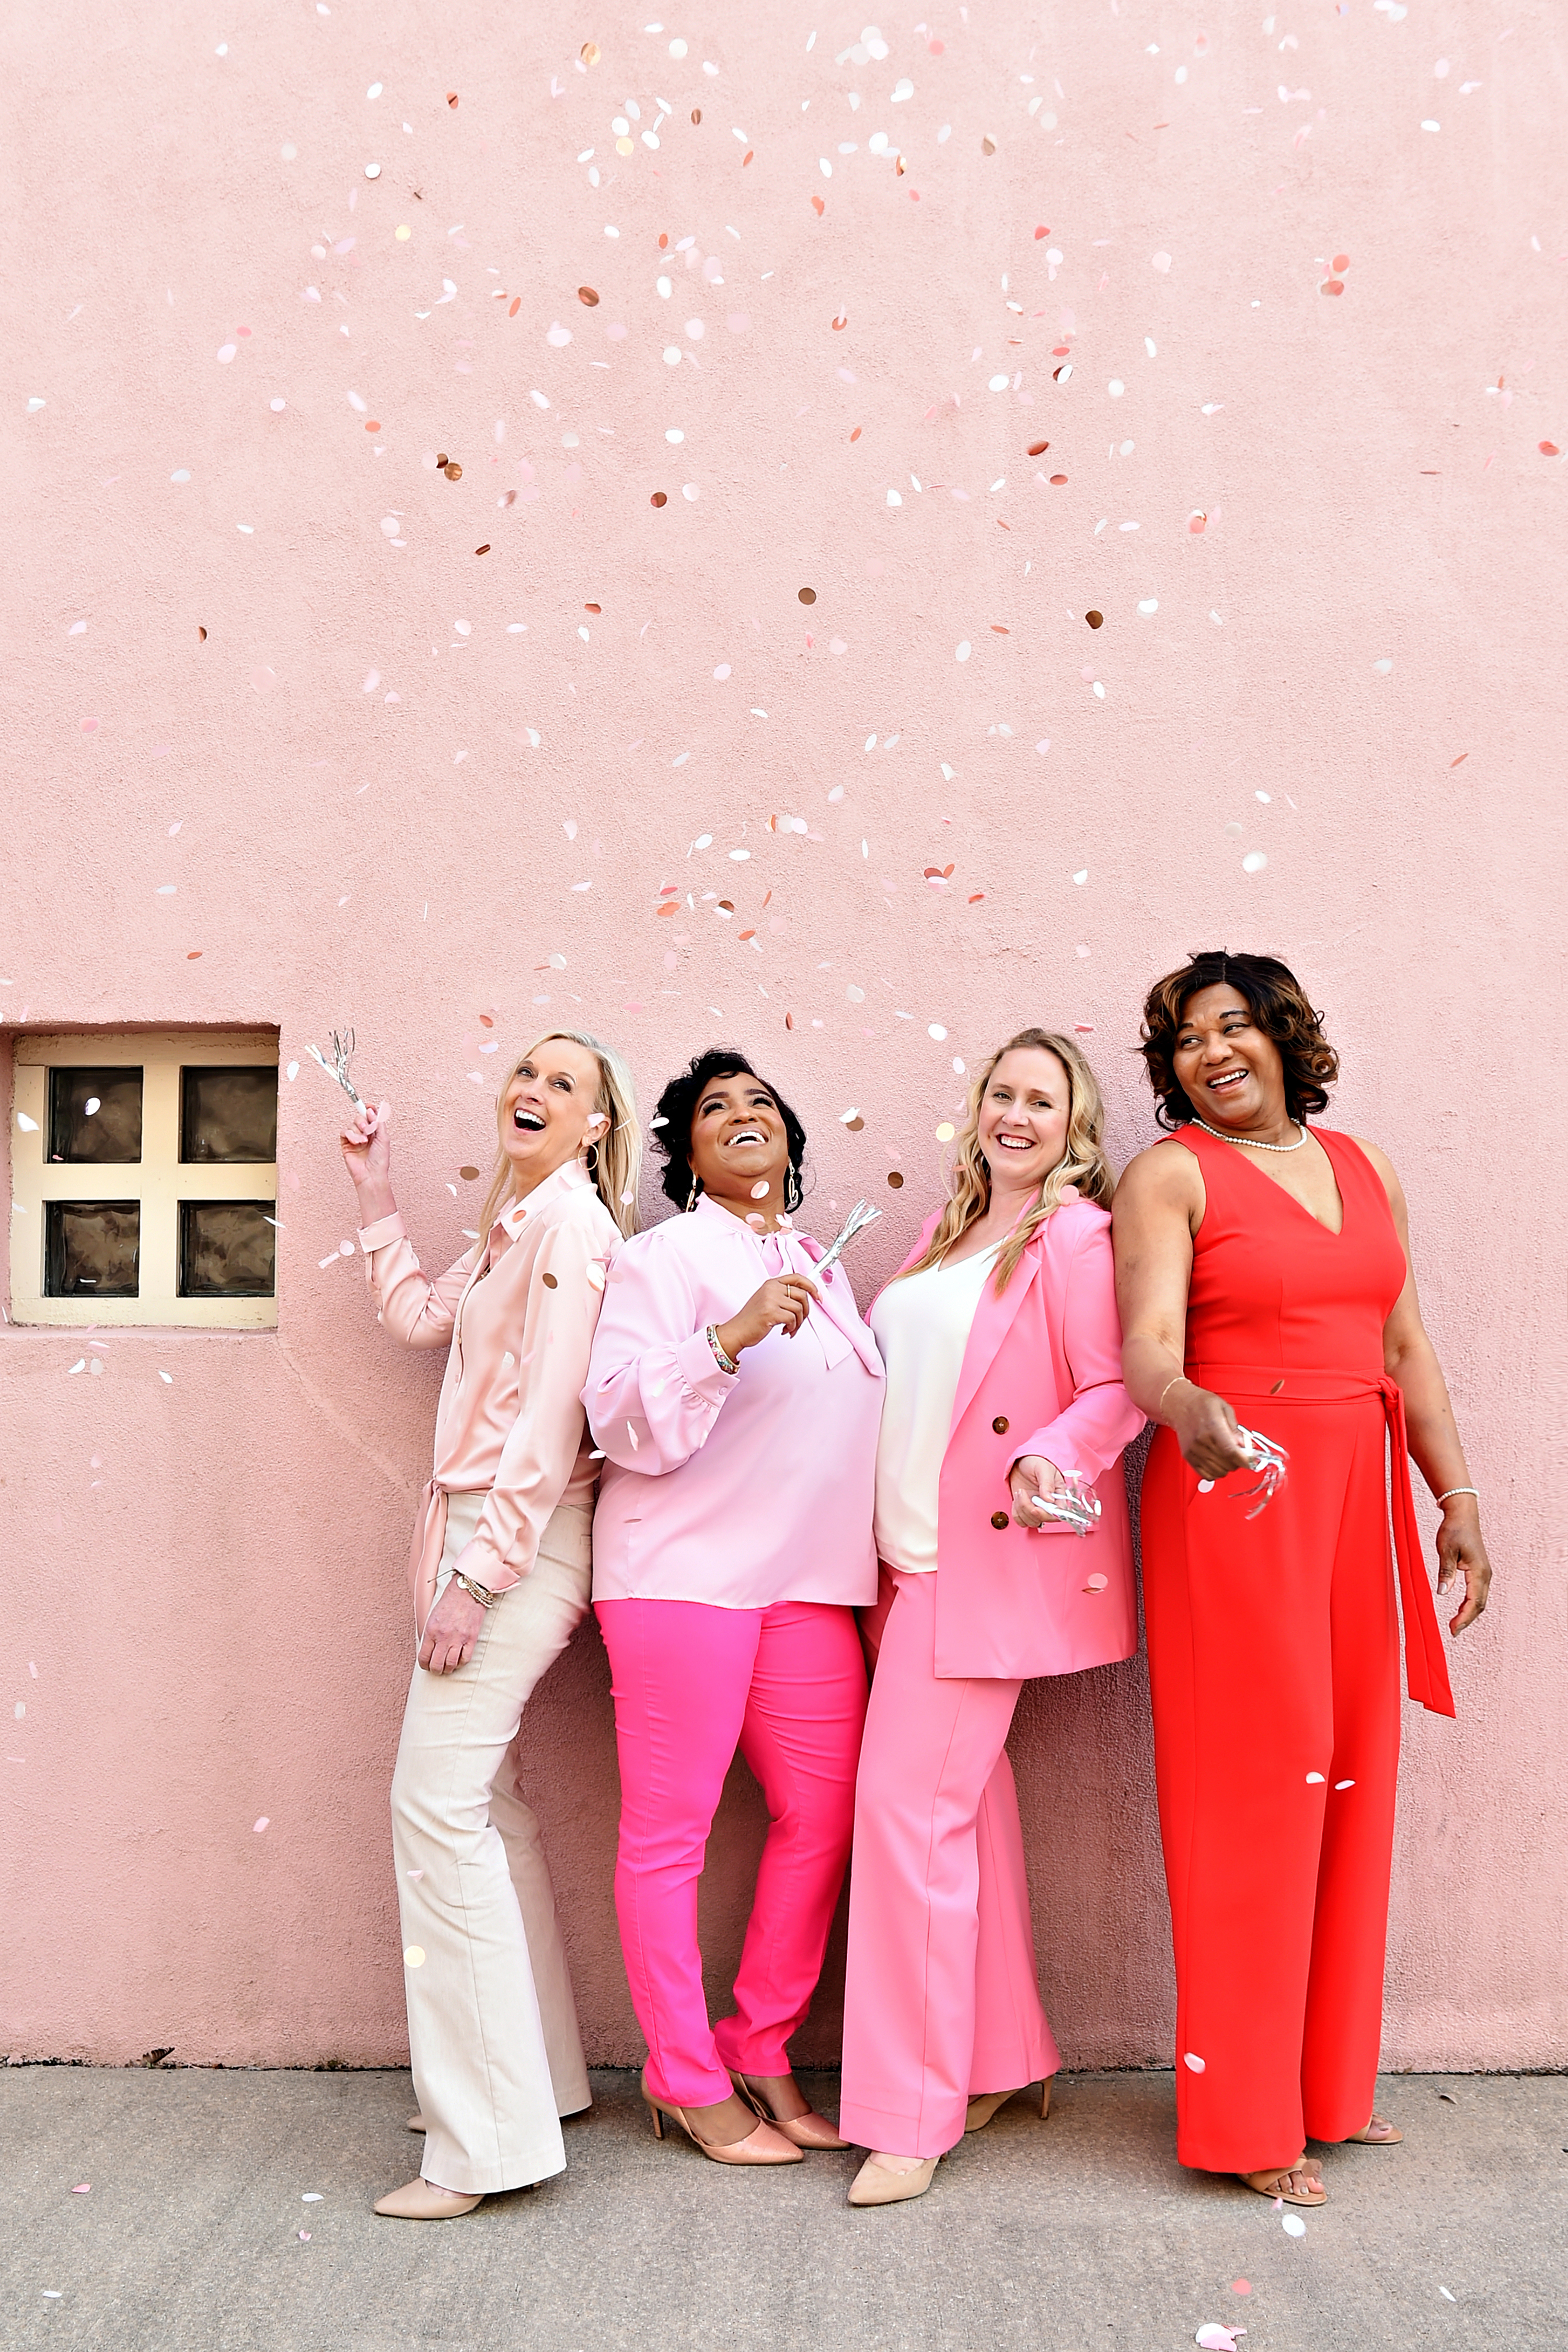 Ladies Standing in front of Pink Wall with Confetti